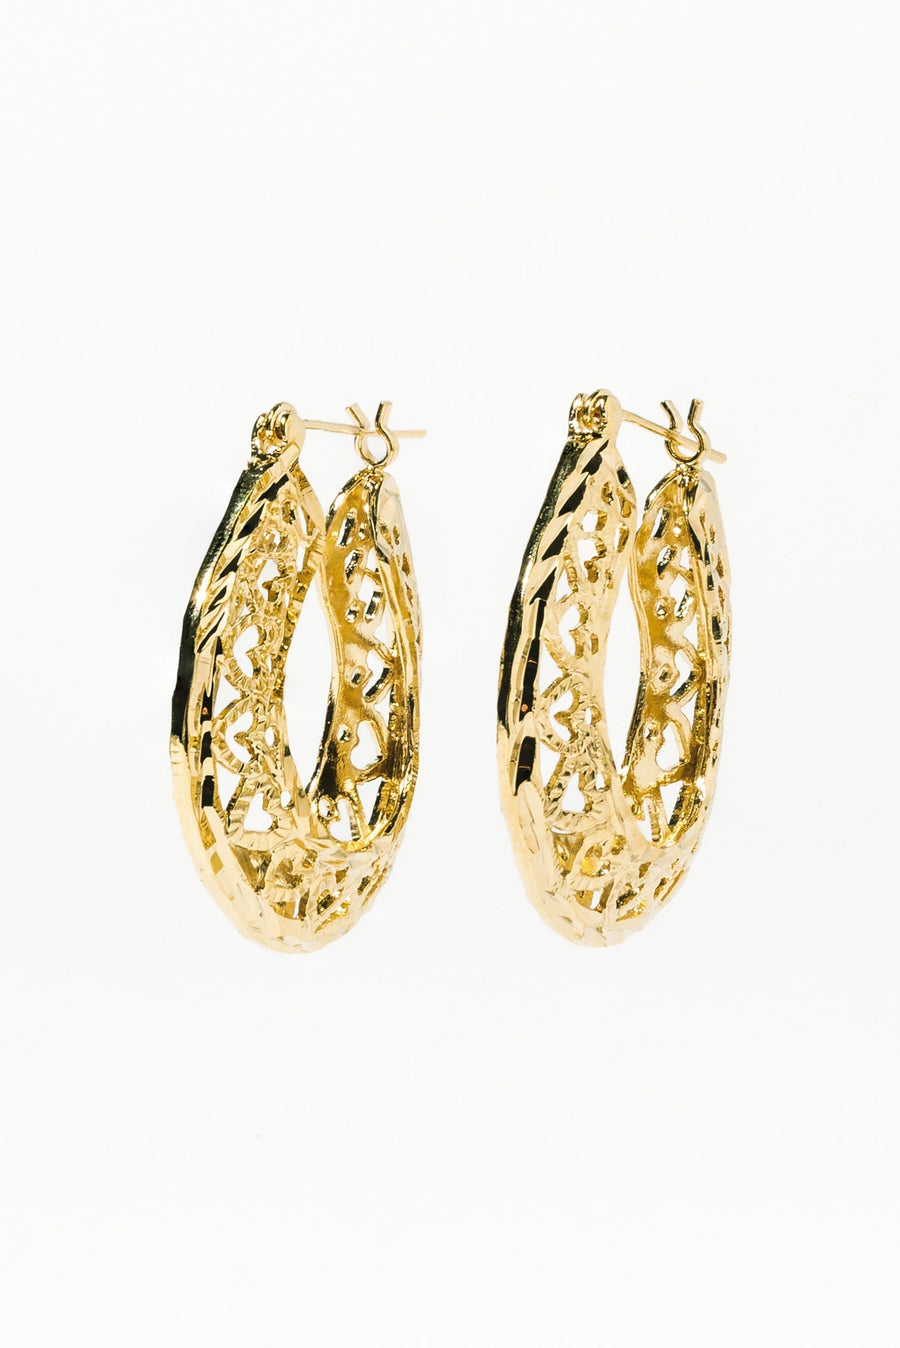 Goddess Jewelry Gold Lover's Club Earrings